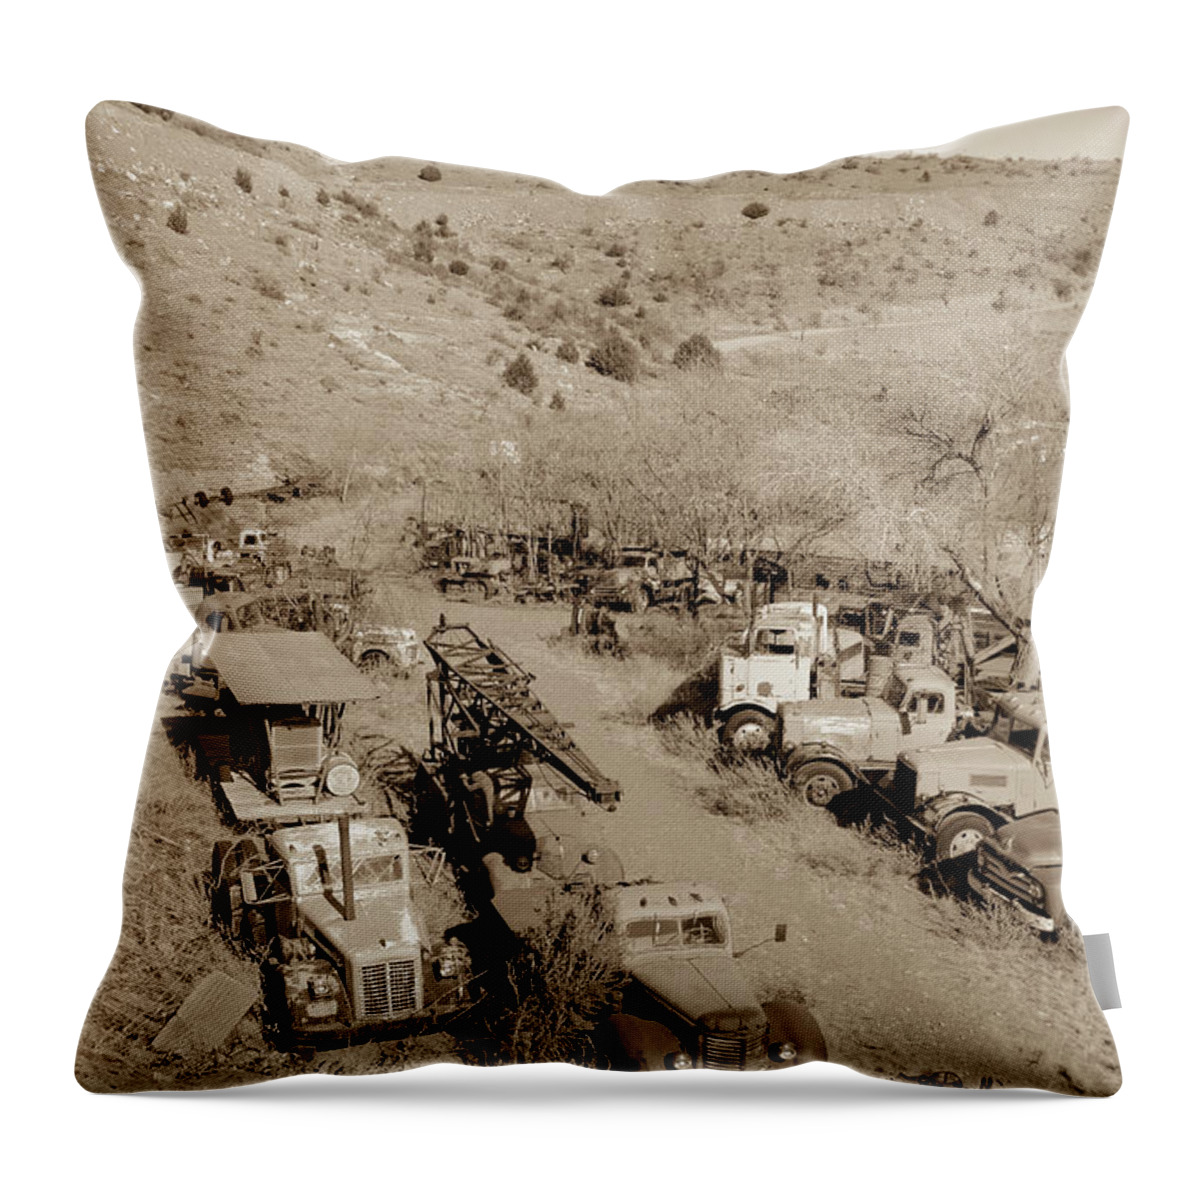 Vintage Throw Pillow featuring the digital art Vintage Truck Yard2 by Darrell Foster